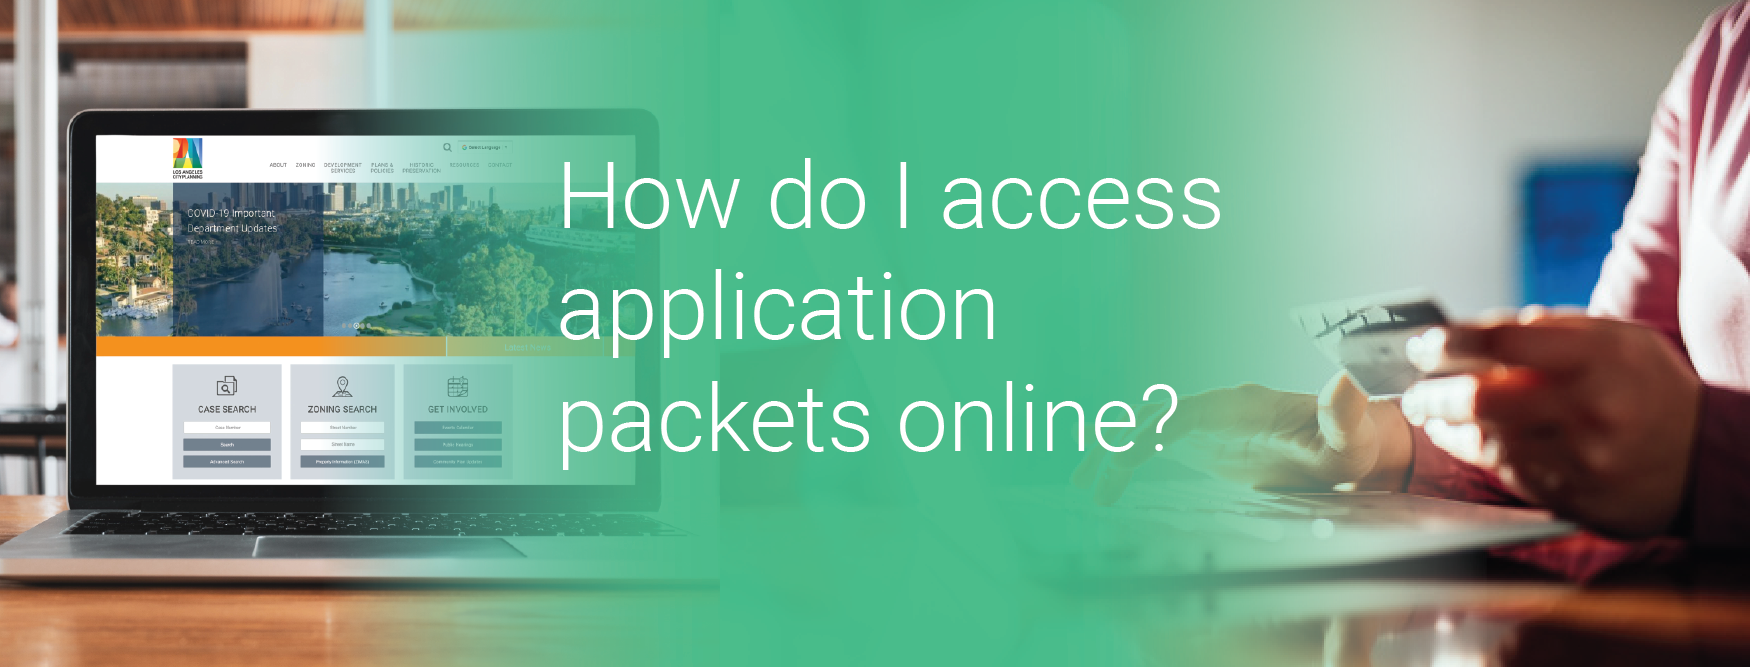 How do I access application requirements online?